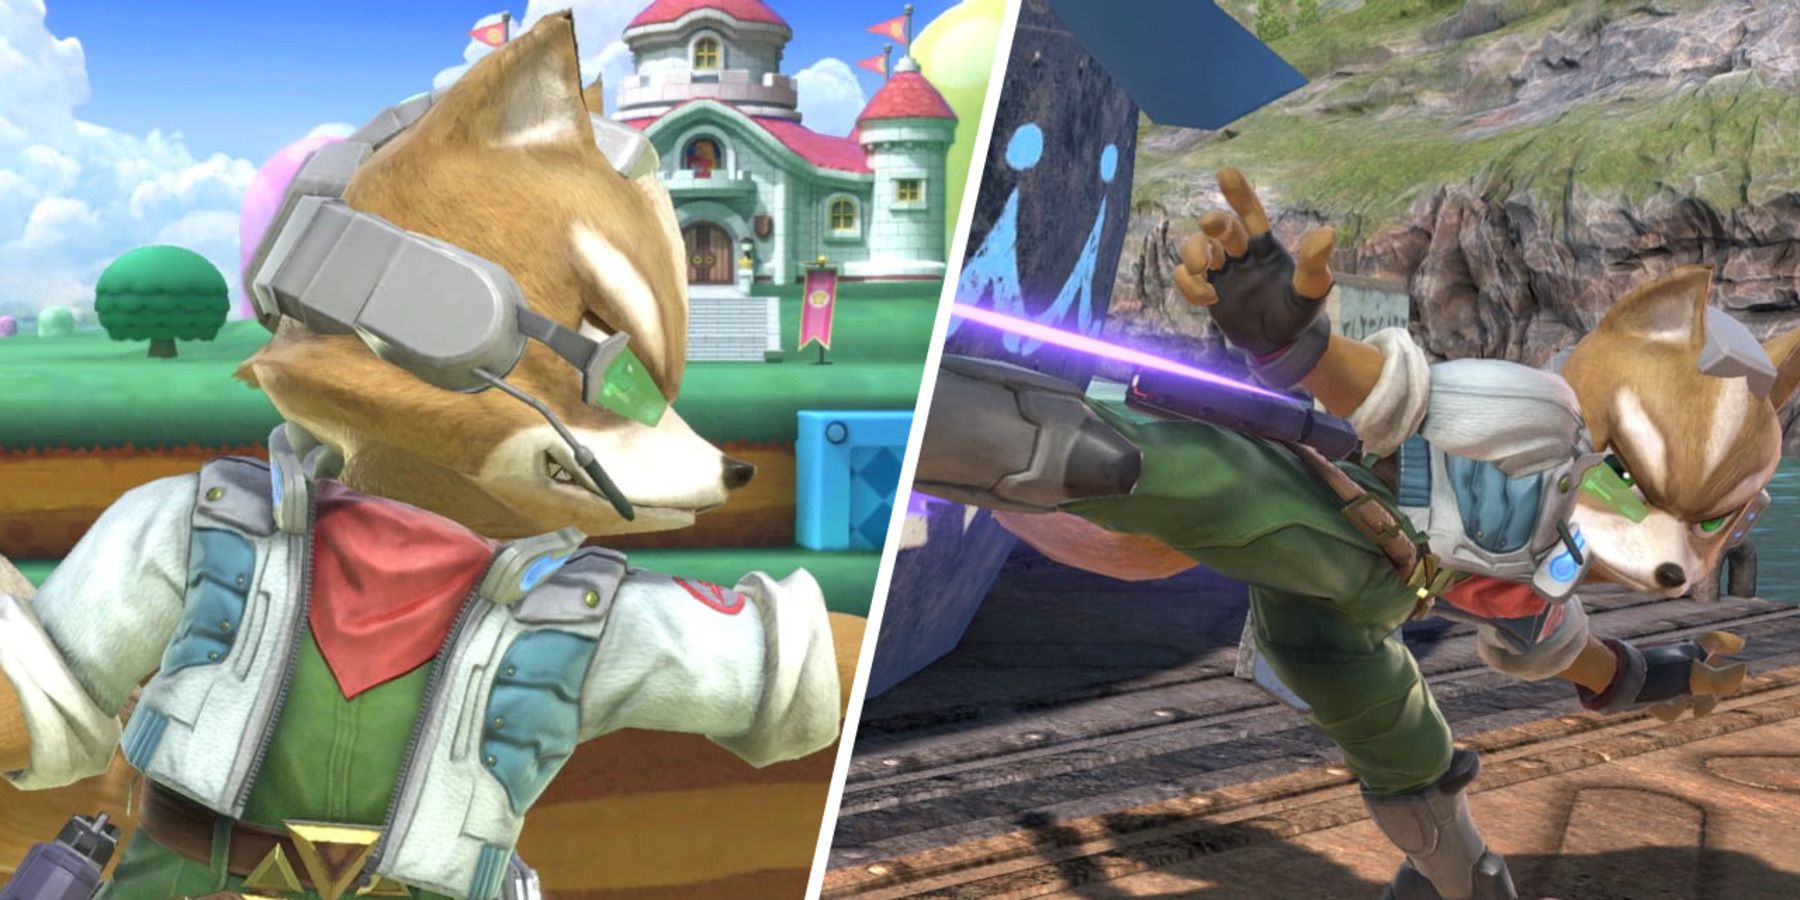 Fox doing one of his idle poses and using jus jab finisher in Super Smash Bros. Ultimate.